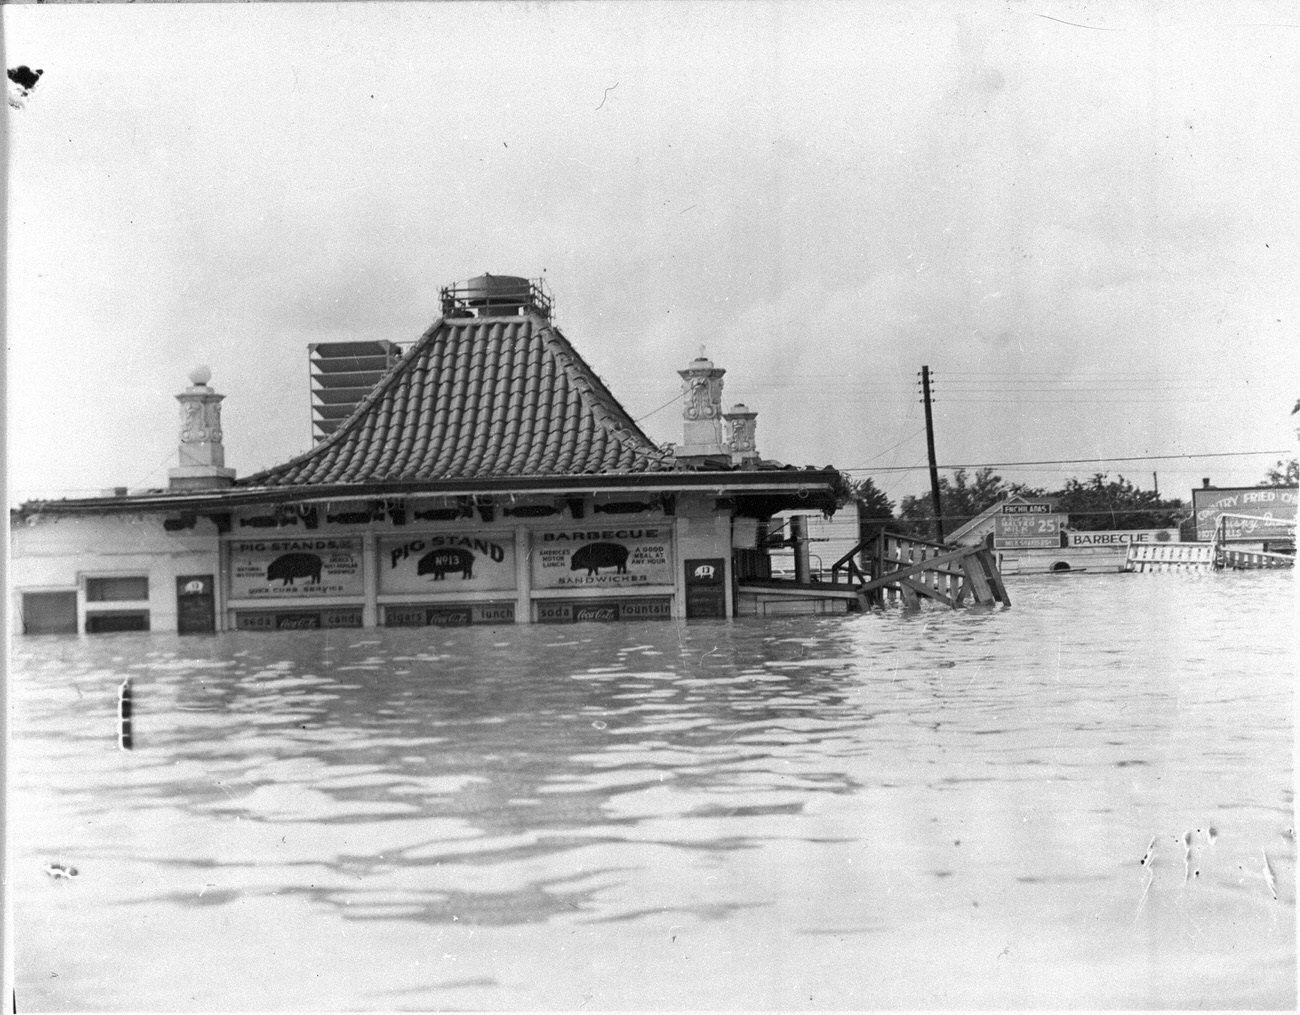 Pig Stand restaurant partially under water during the May 1949 flood in Fort Worth, Texas